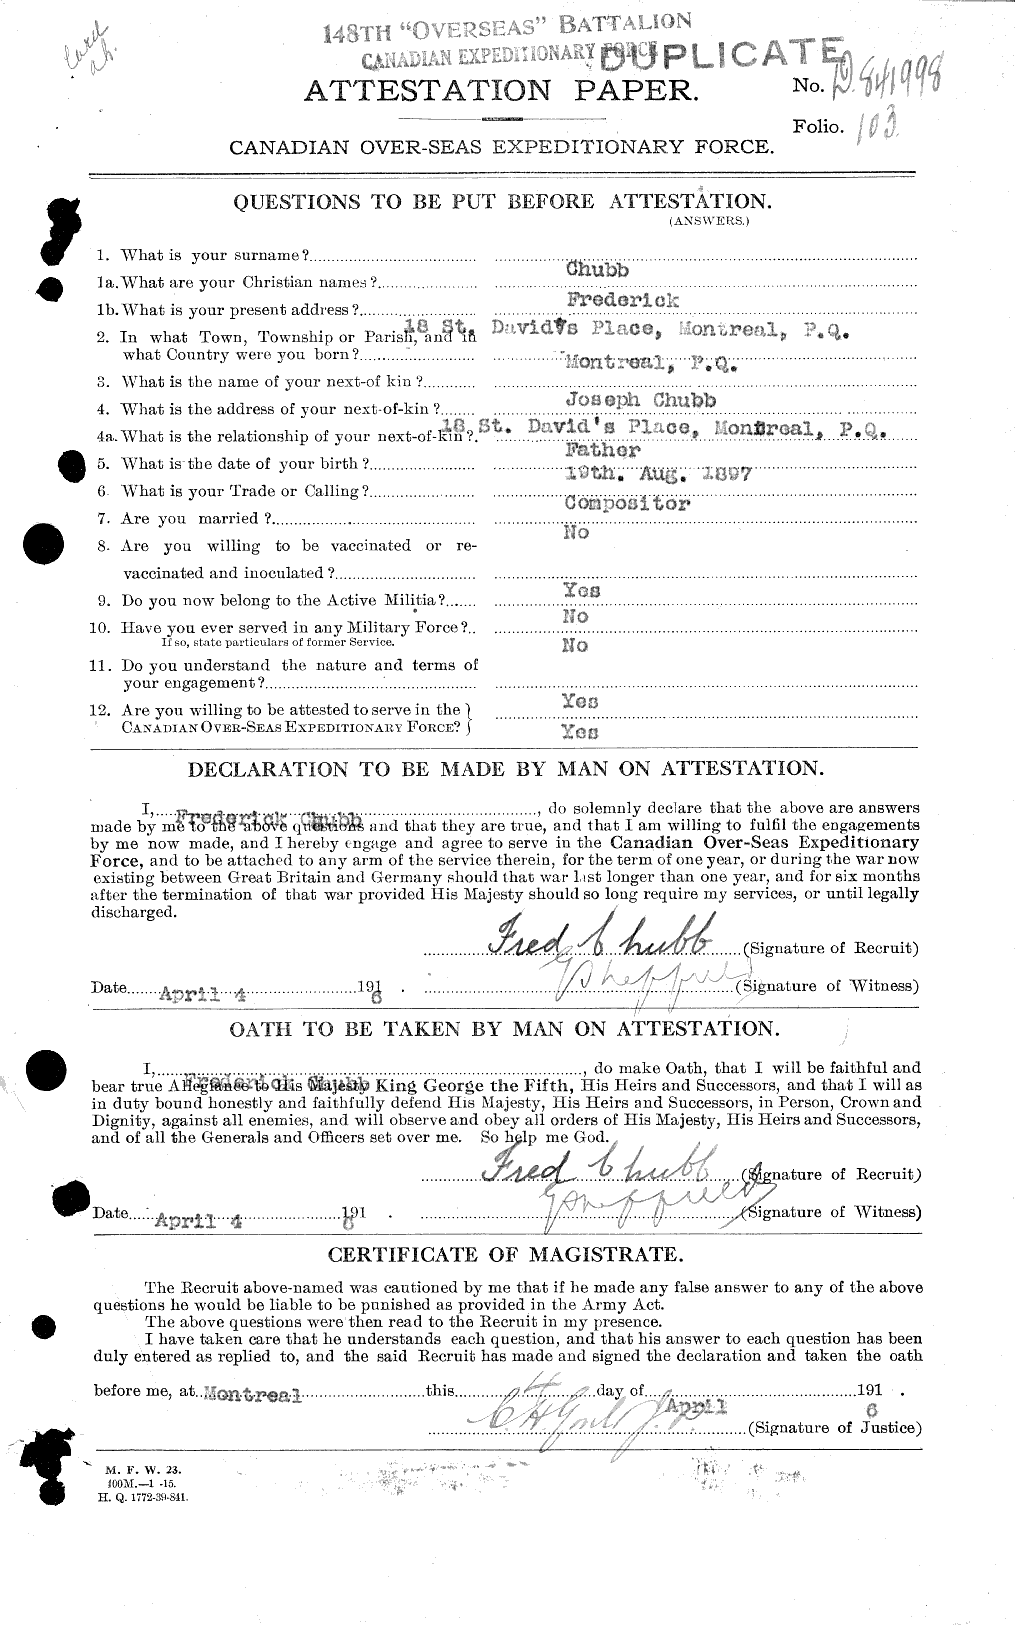 Personnel Records of the First World War - CEF 022263a